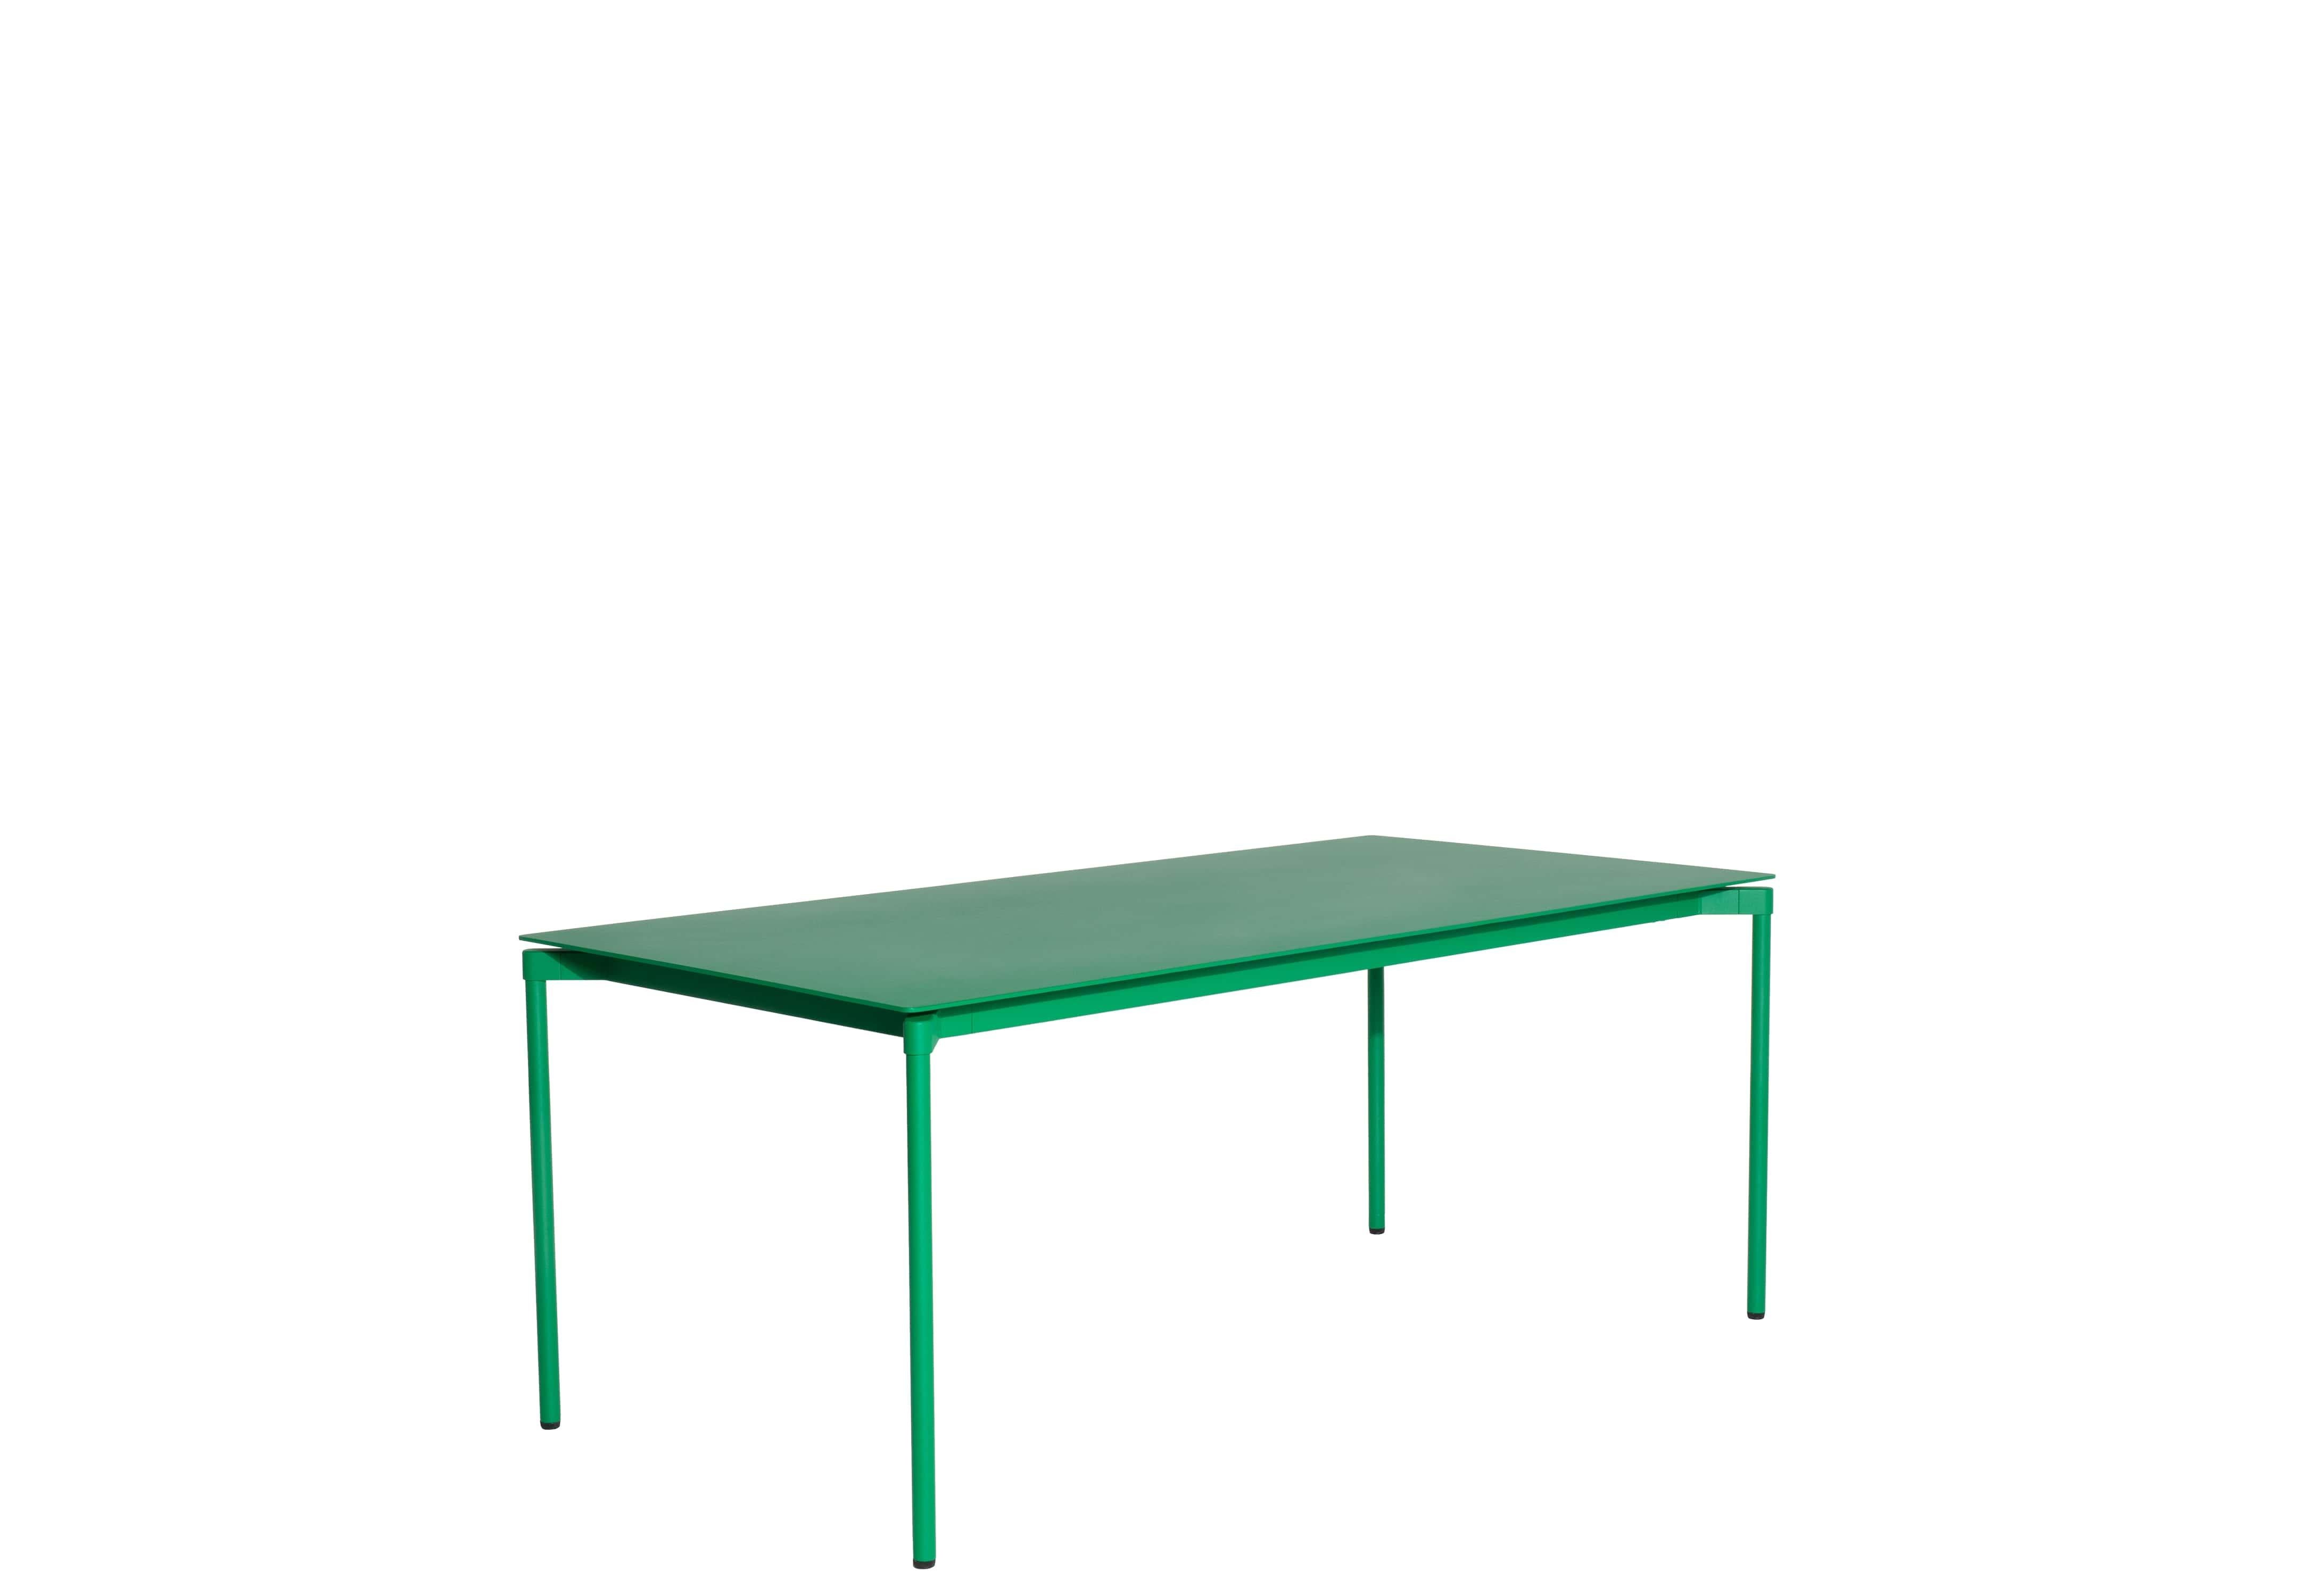 Petite Friture Fromme Rectangular Table in Mint-green Aluminium by Tom Chung, 2020

The Fromme collection stands out by its pure line and compact design. Absorbers placed under the seating gives a soft and very comfortable flexibility to seats.